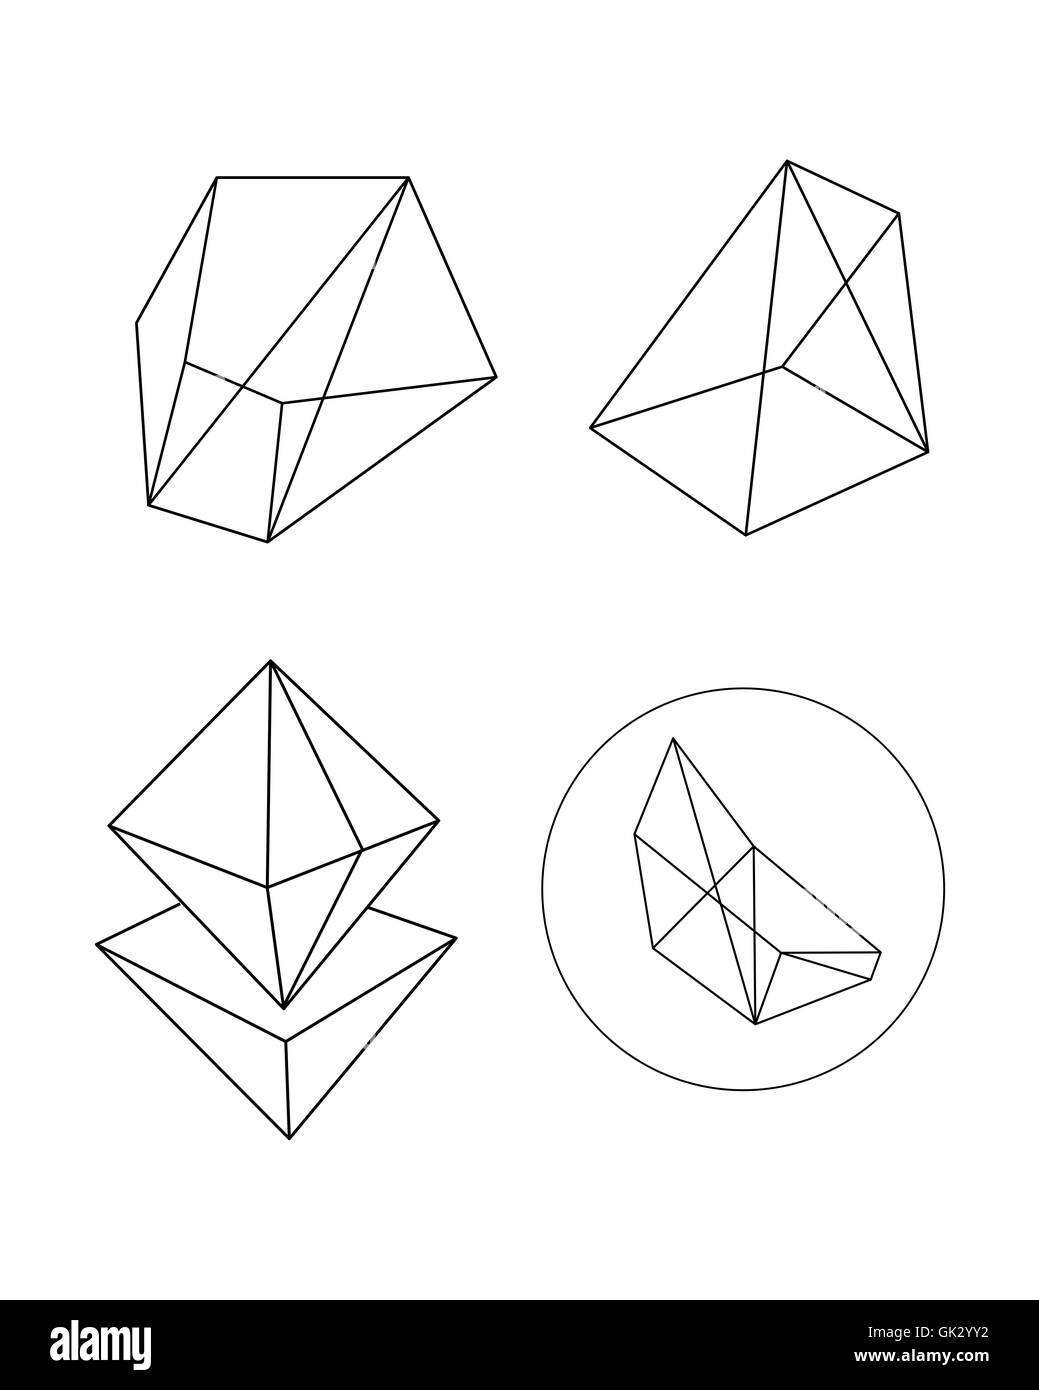 Vector illustration or drawing of different polygonal geometric abstract forms Stock Photo